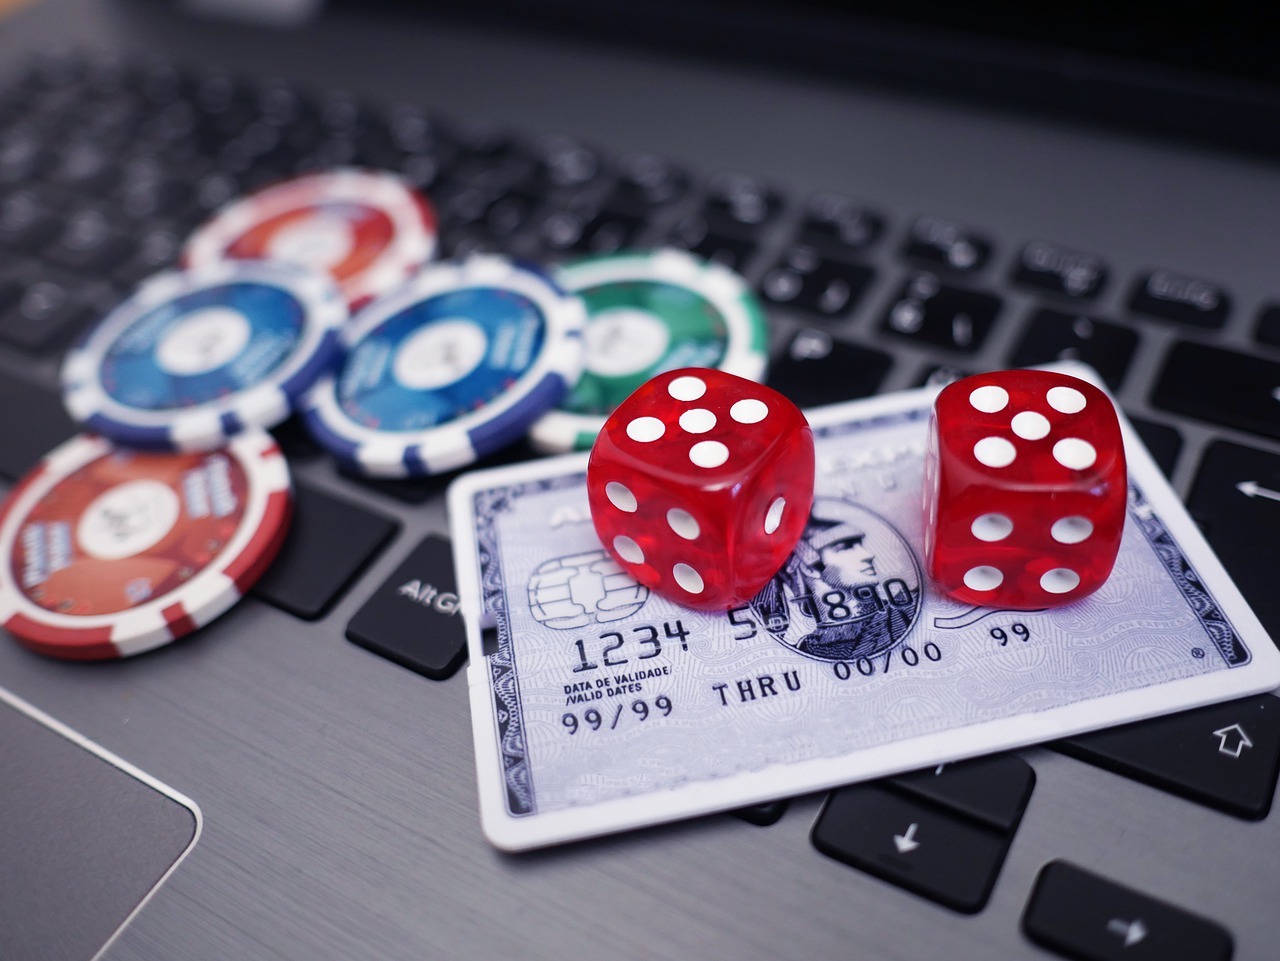 Finding many online slots in online casinos is not a surprise in 2021. Discover the top 3 slots in online casinos now.